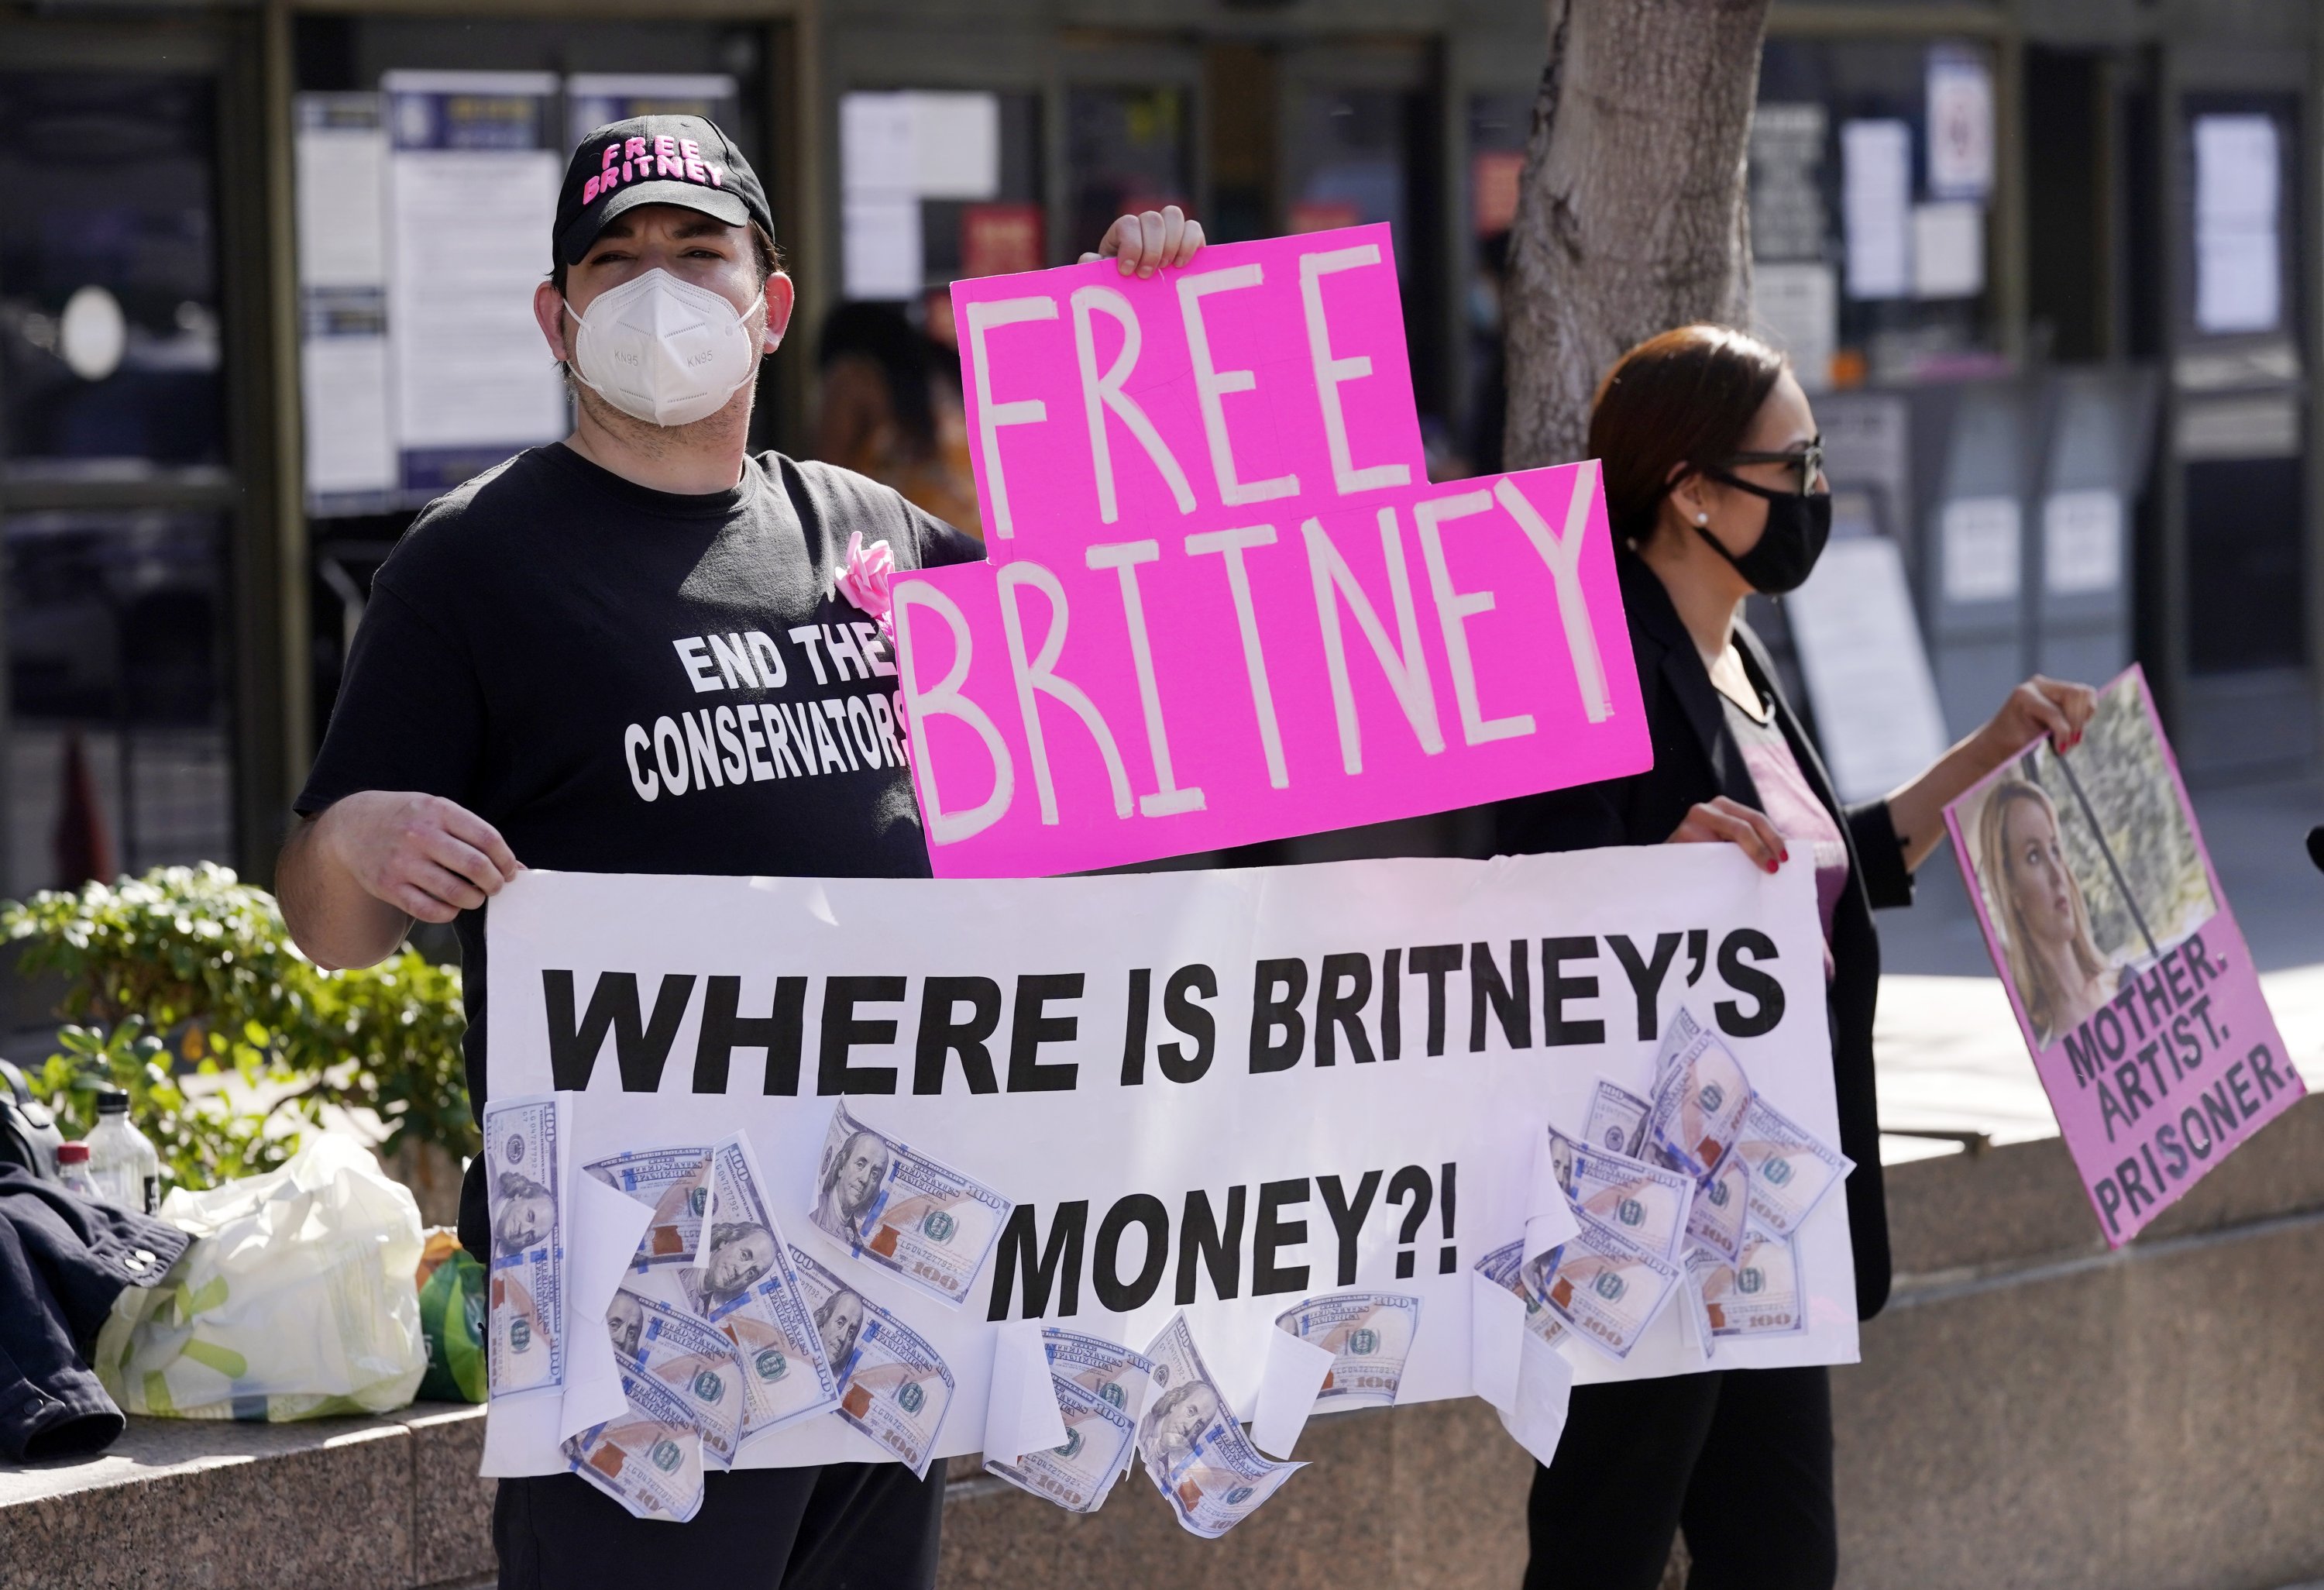 Britney Spears supporters Dustin Strand (L) and Kiki Norberto, both of Phoenix, hold signs outside a court hearing concerning the pop singer